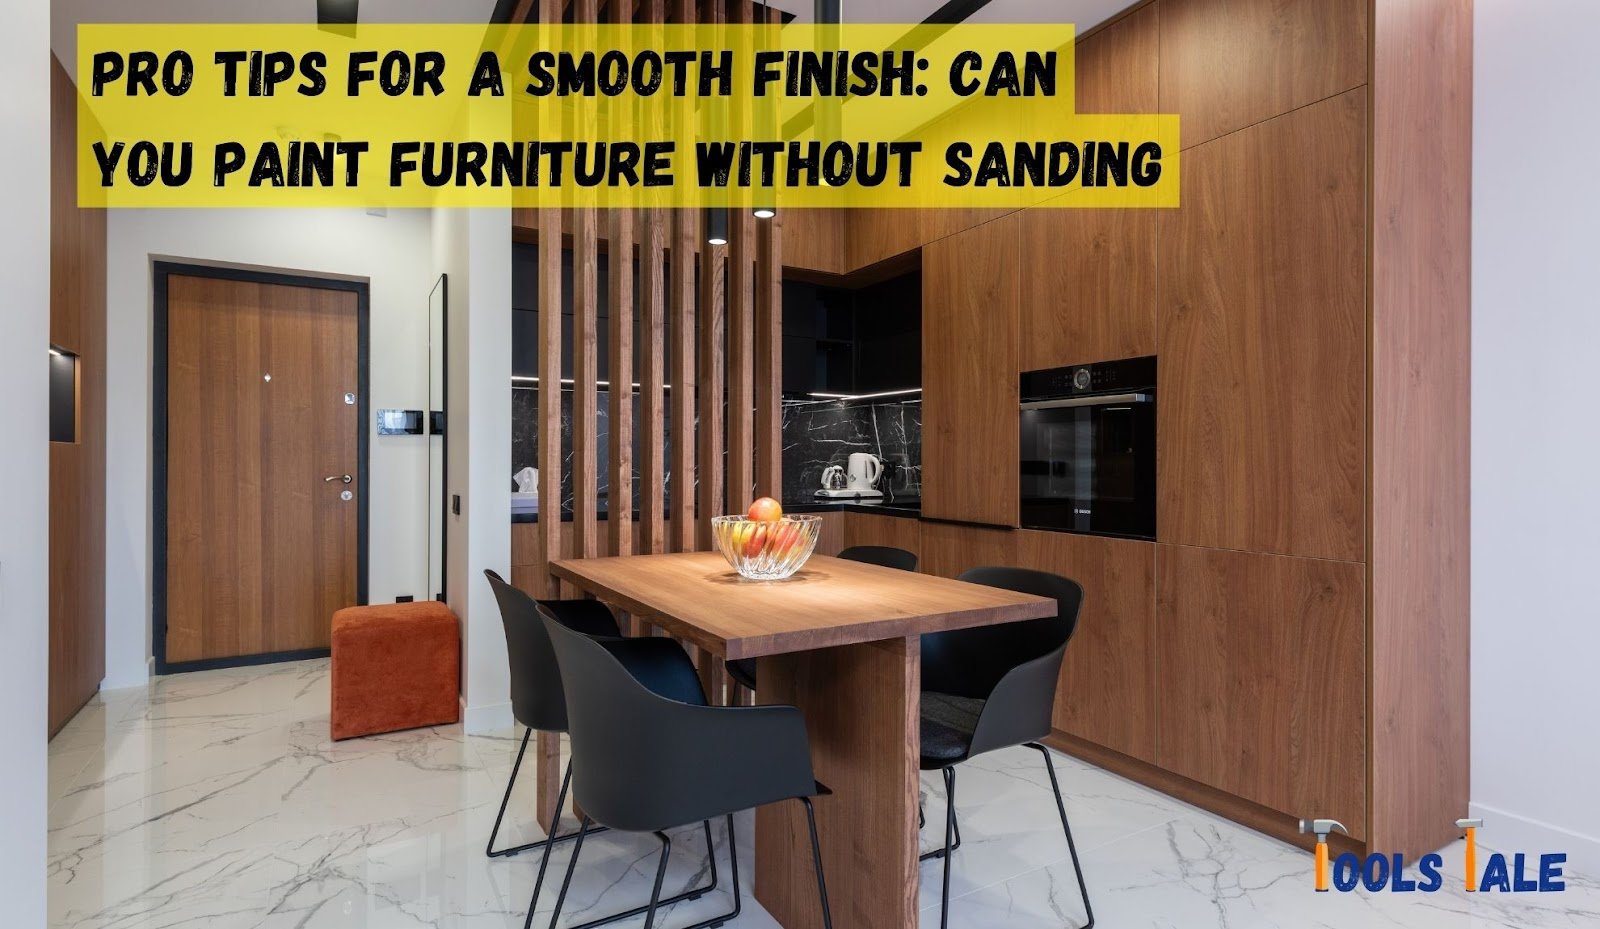 Can you paint furniture without sanding